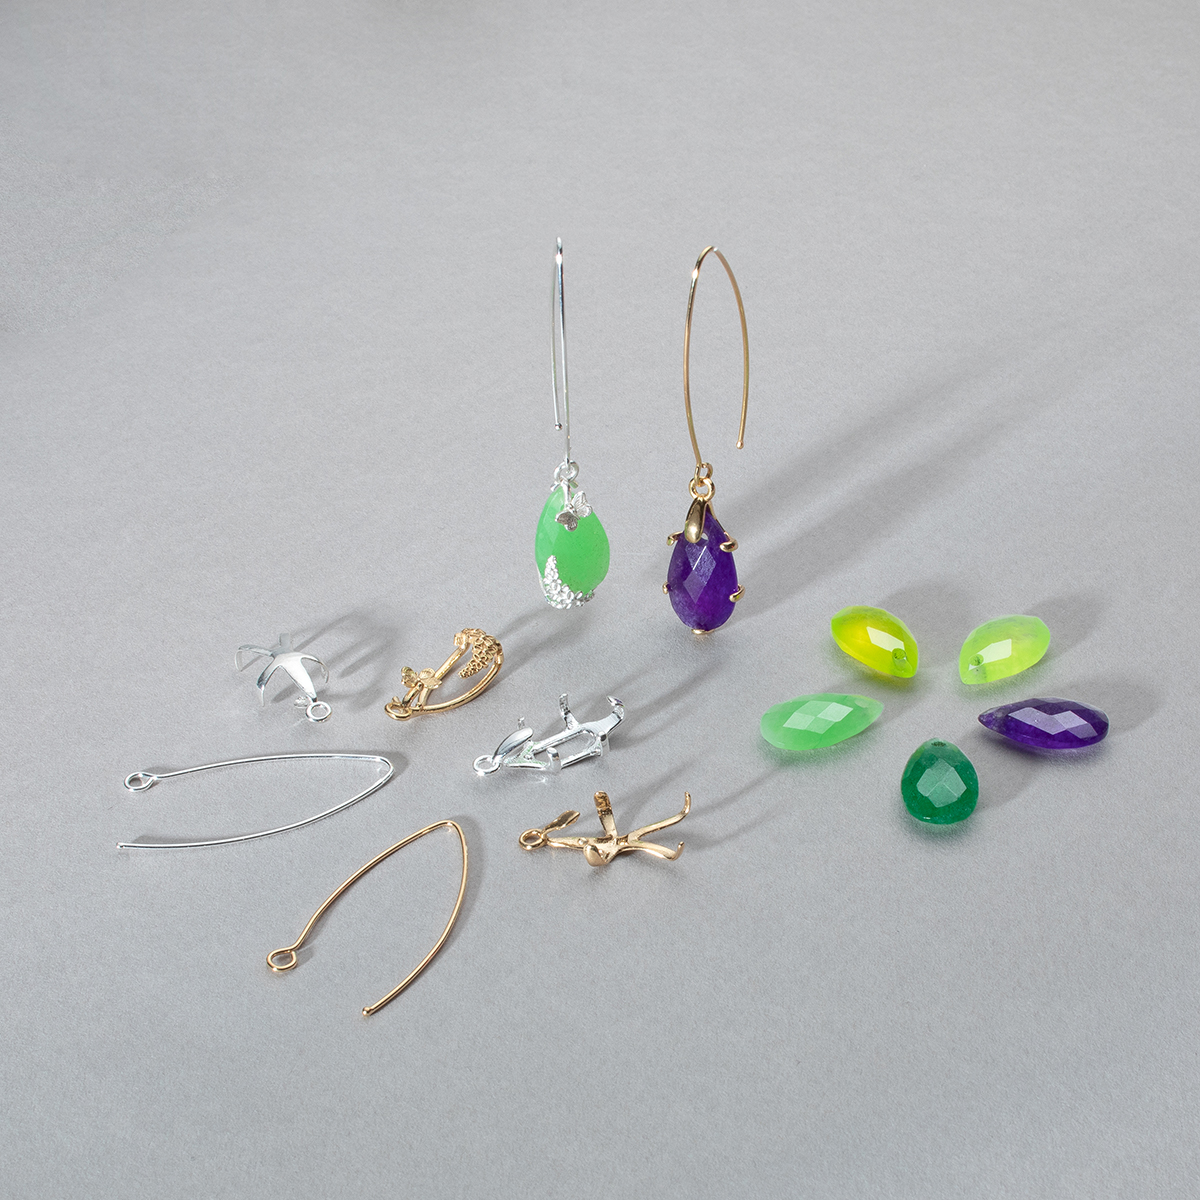 When Do I Design with Ear Wires, Post Earrings or Wire Earrings